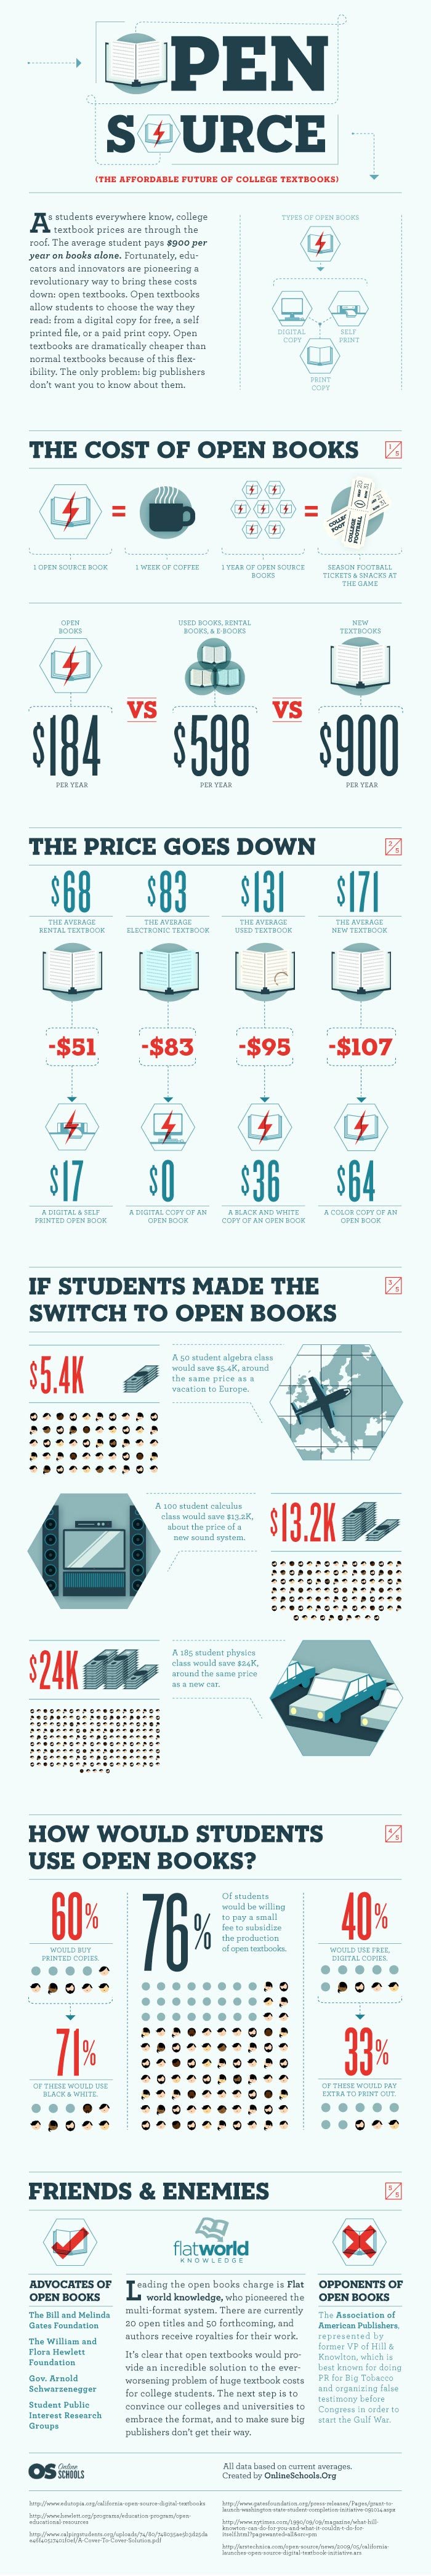 Open Source Textbooks Infographic